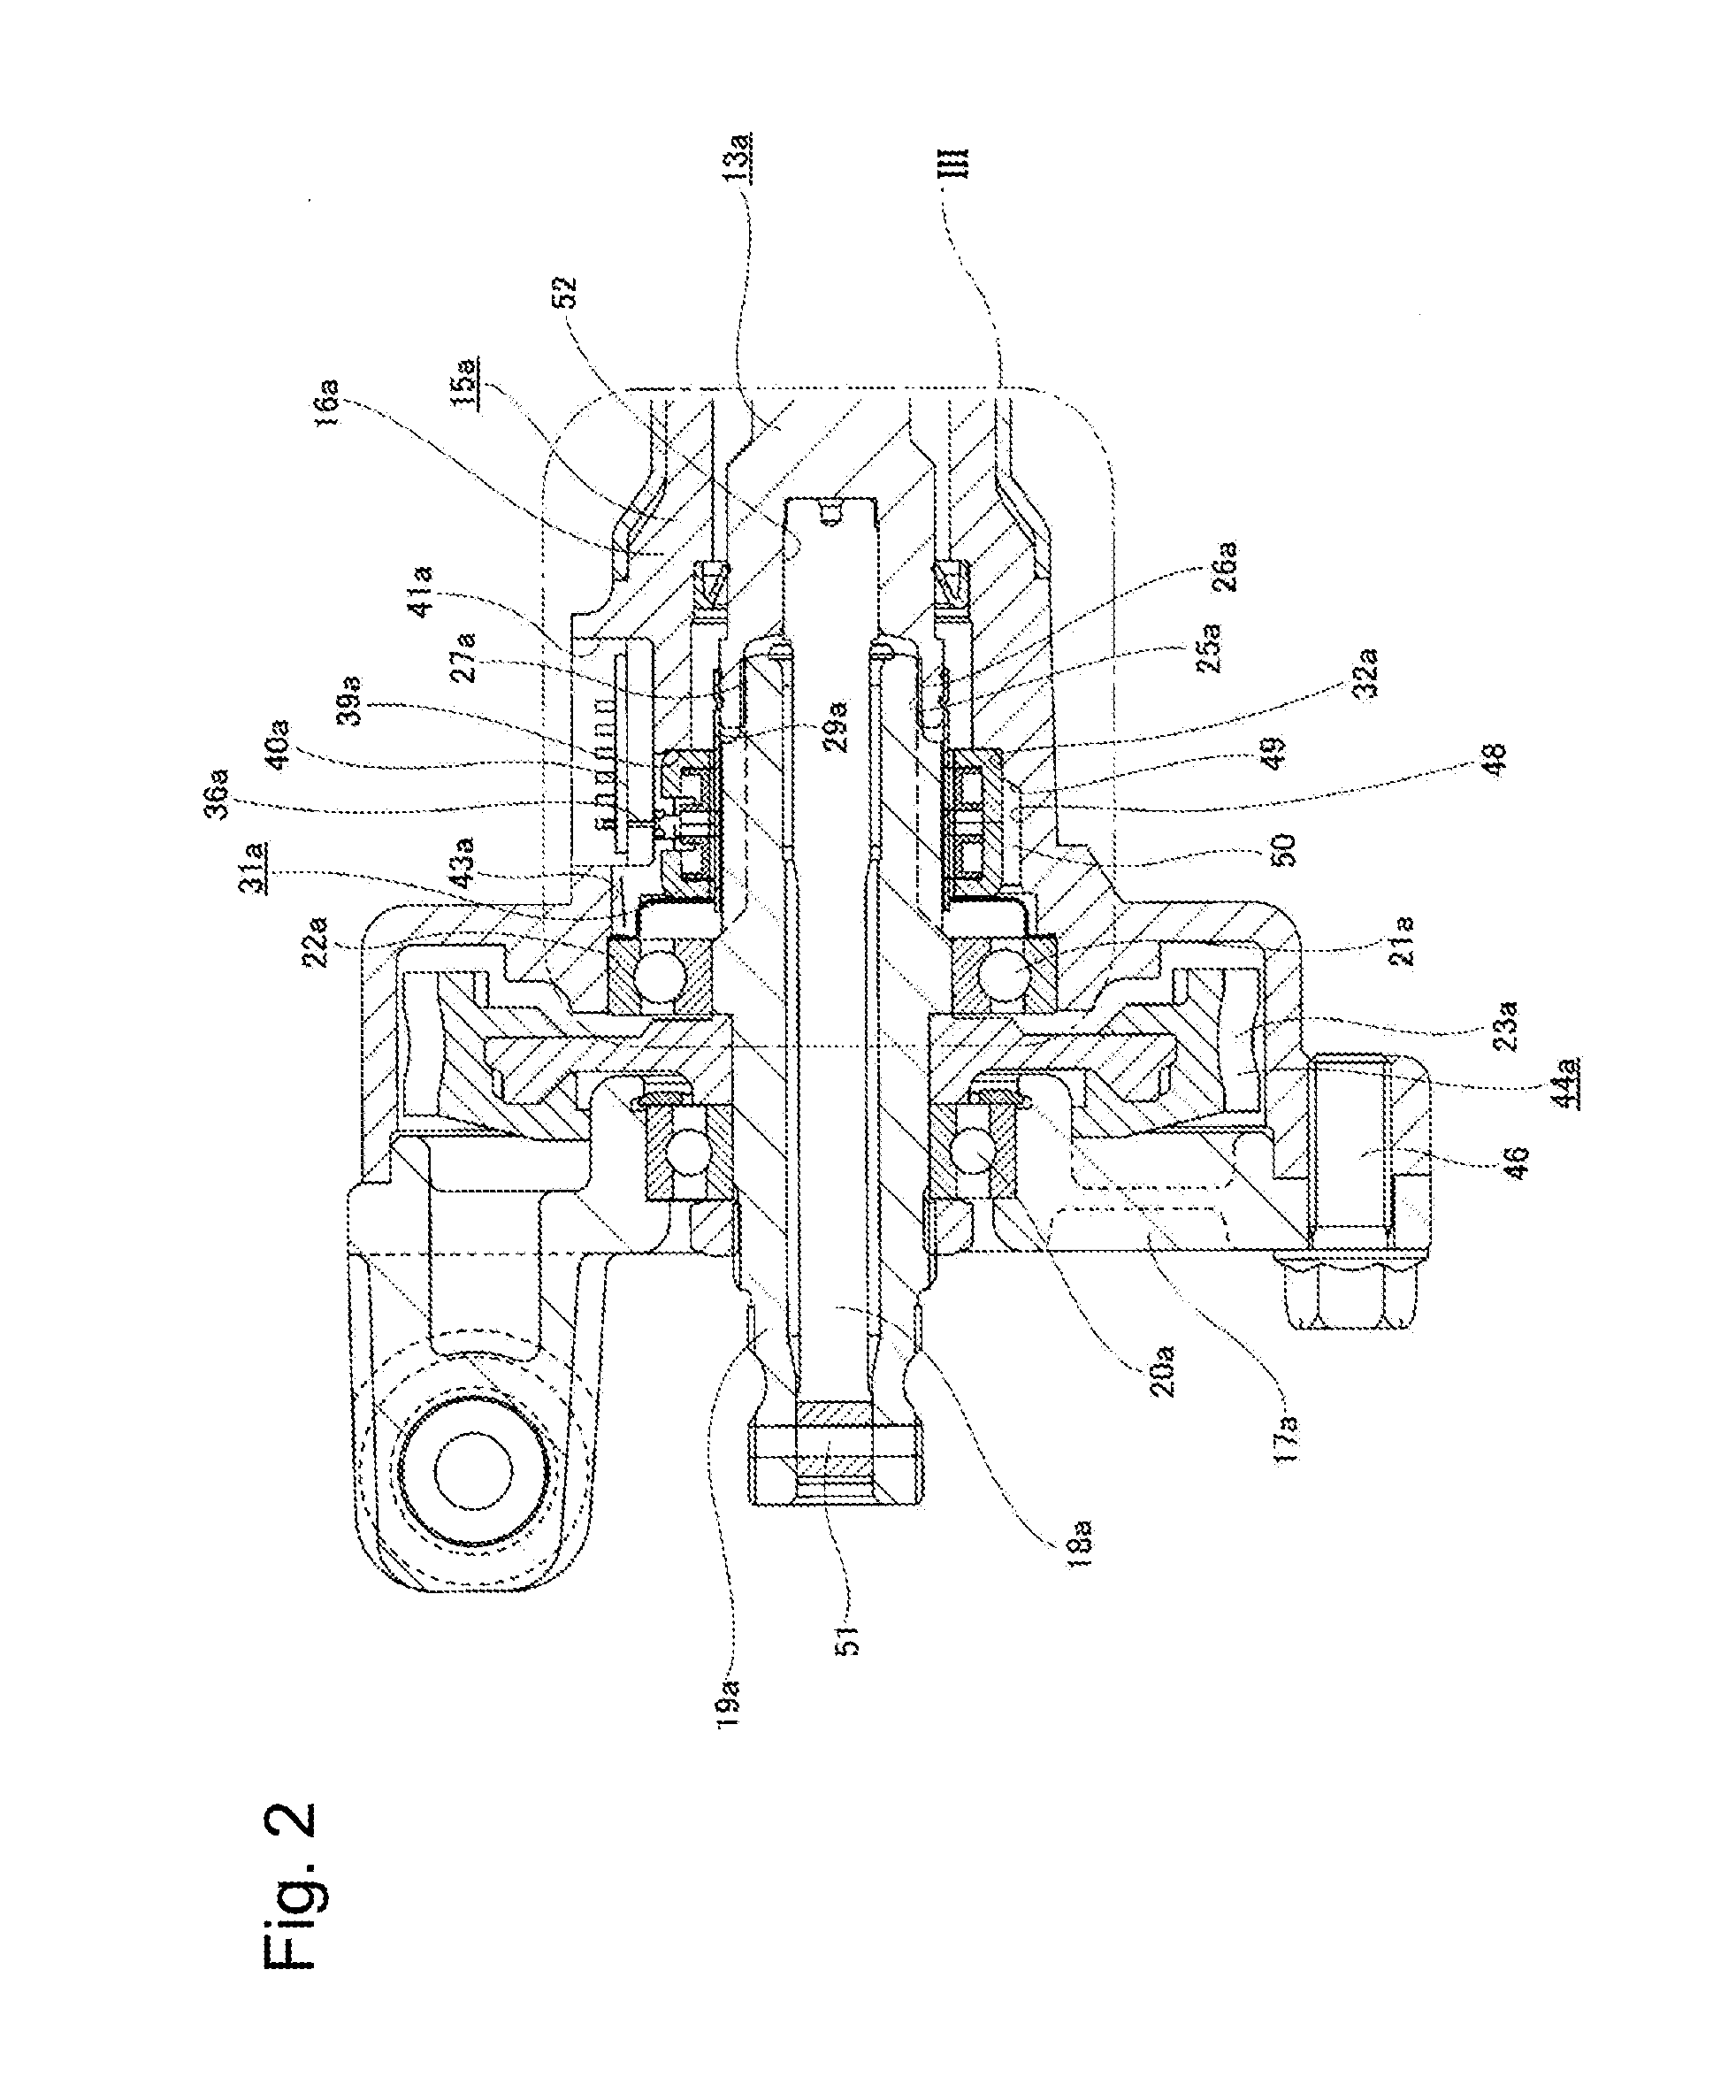 Torque measuring unit for electric power steering device and method of assembling the same